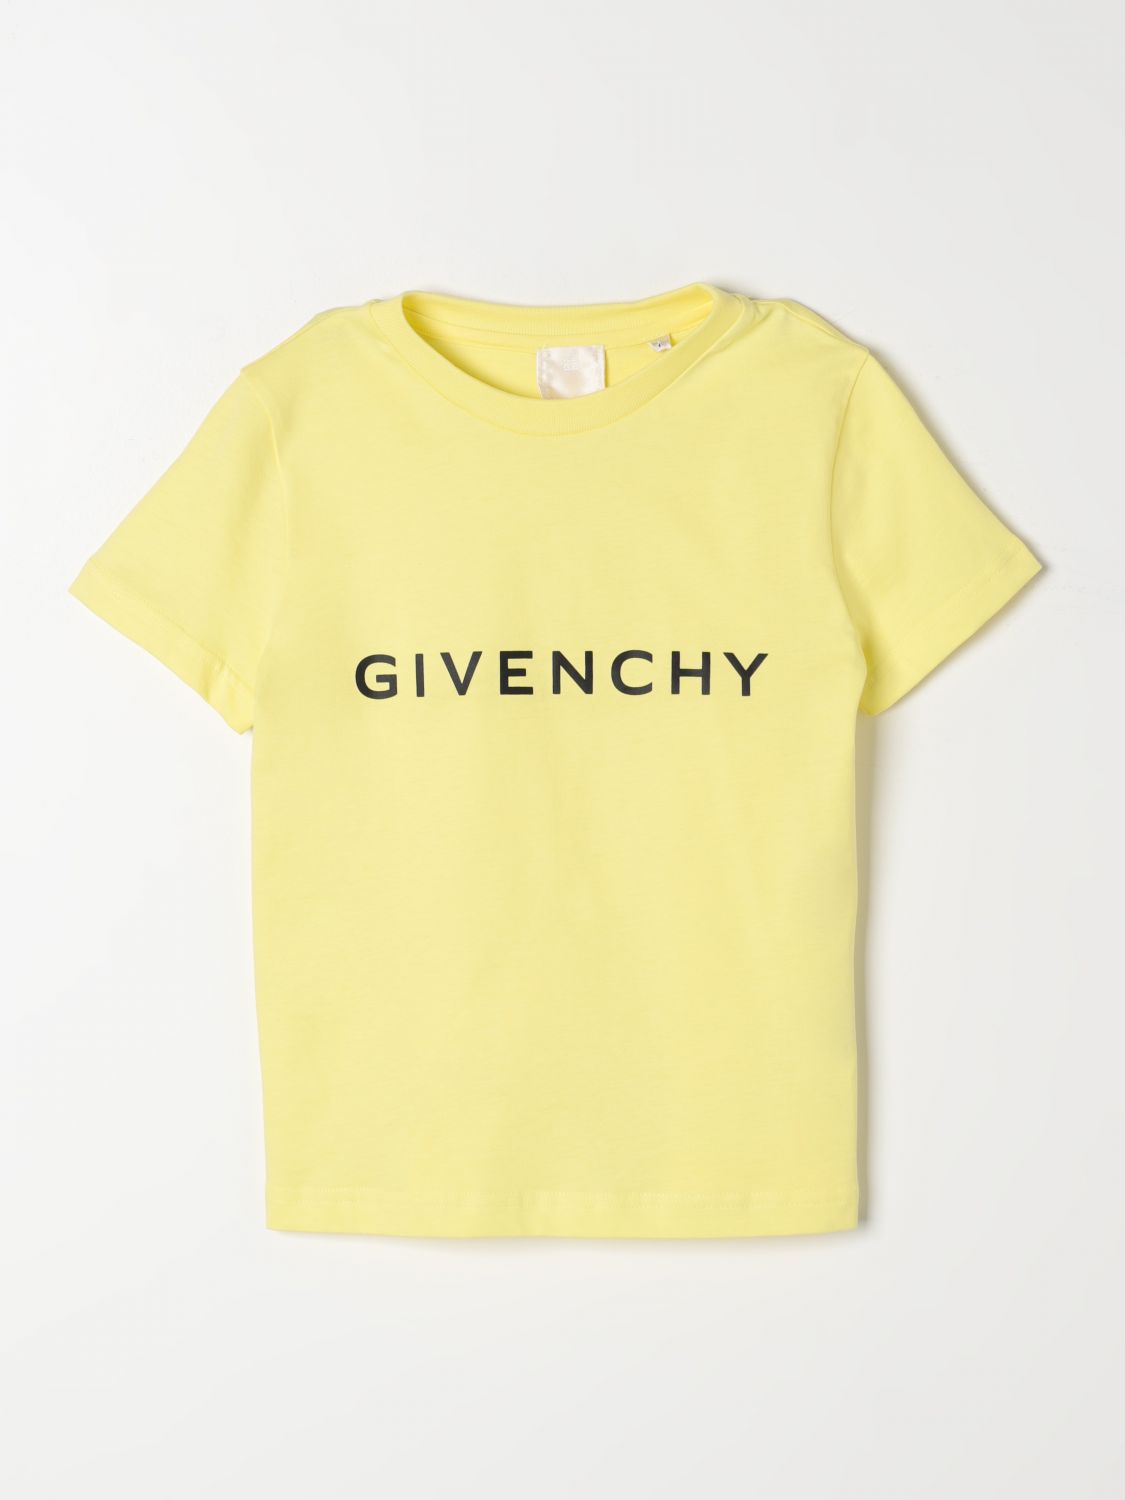 Givenchy T-shirt  Kids Color Yellow